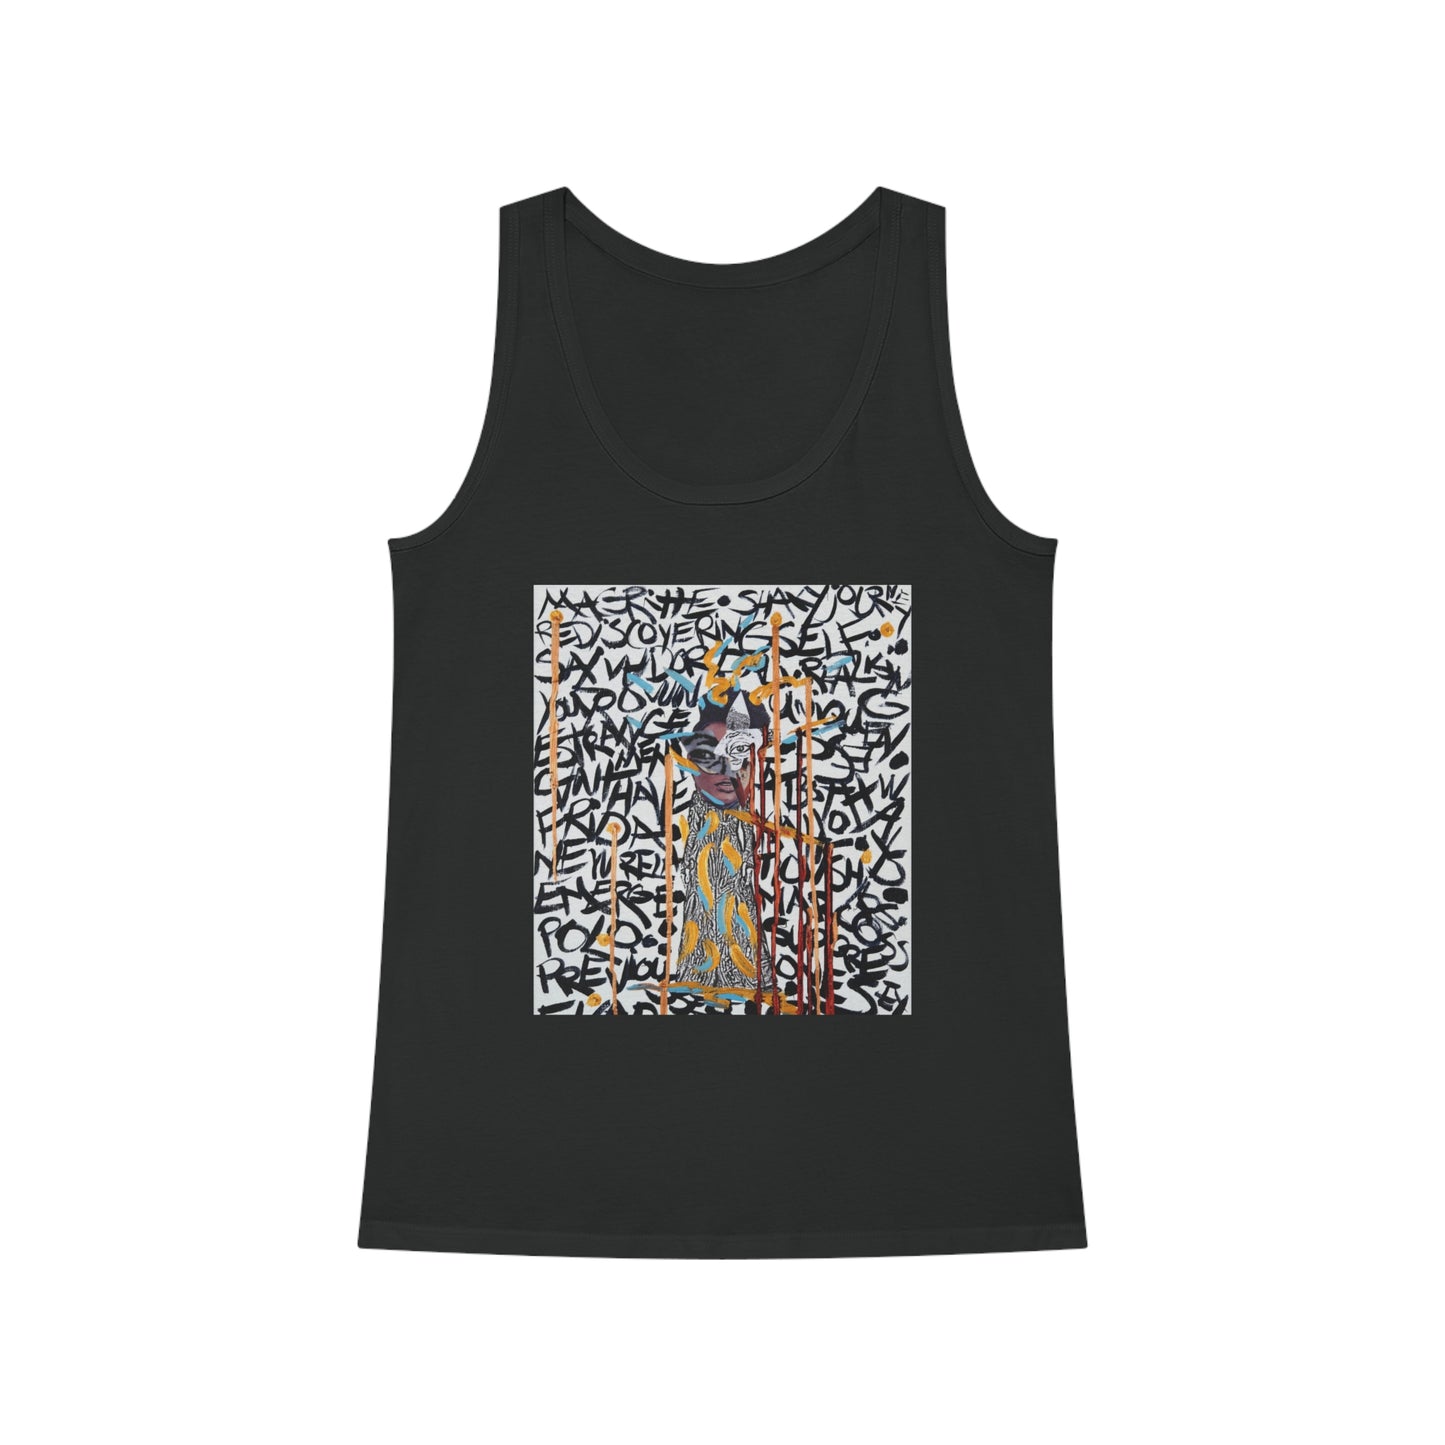 "Magritte by Courtney Minor" Dreamer Tank Top